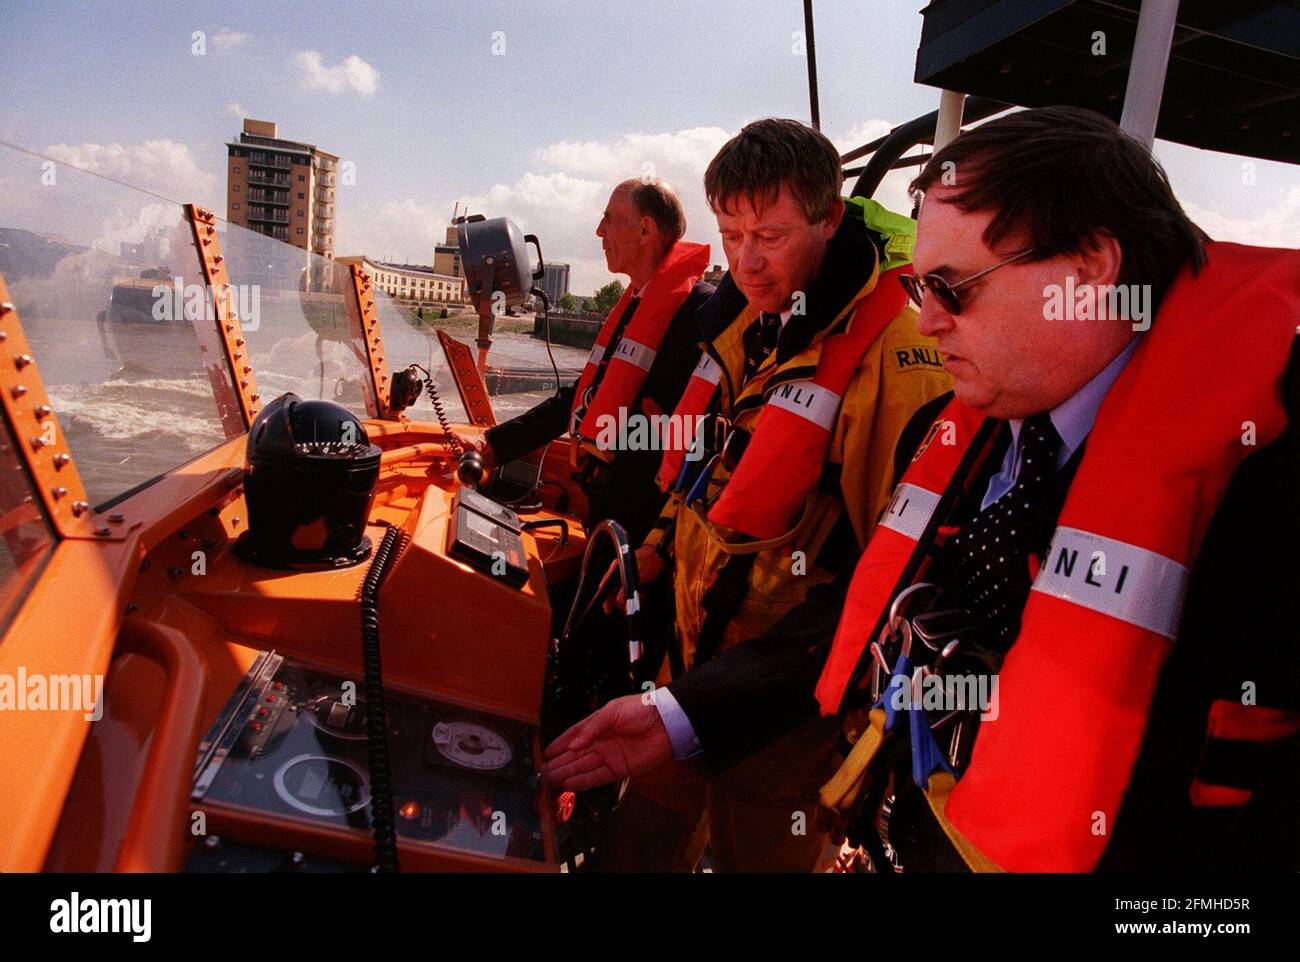 JOHN PRESCOTT MP ON BOARD THE ROYAL NATIONAL LIFEBOAT INSTITUTION'S, SEVERN CLASS ALL WEATHER LIFEBOATS WITH THE DOVER COXWAIN DAVE PASCALL. HE PRESENTED THE CHARITY WITH A MILLENNIUM PRODUCT PLAQUE TODAY ON THE THAMES. Stock Photo